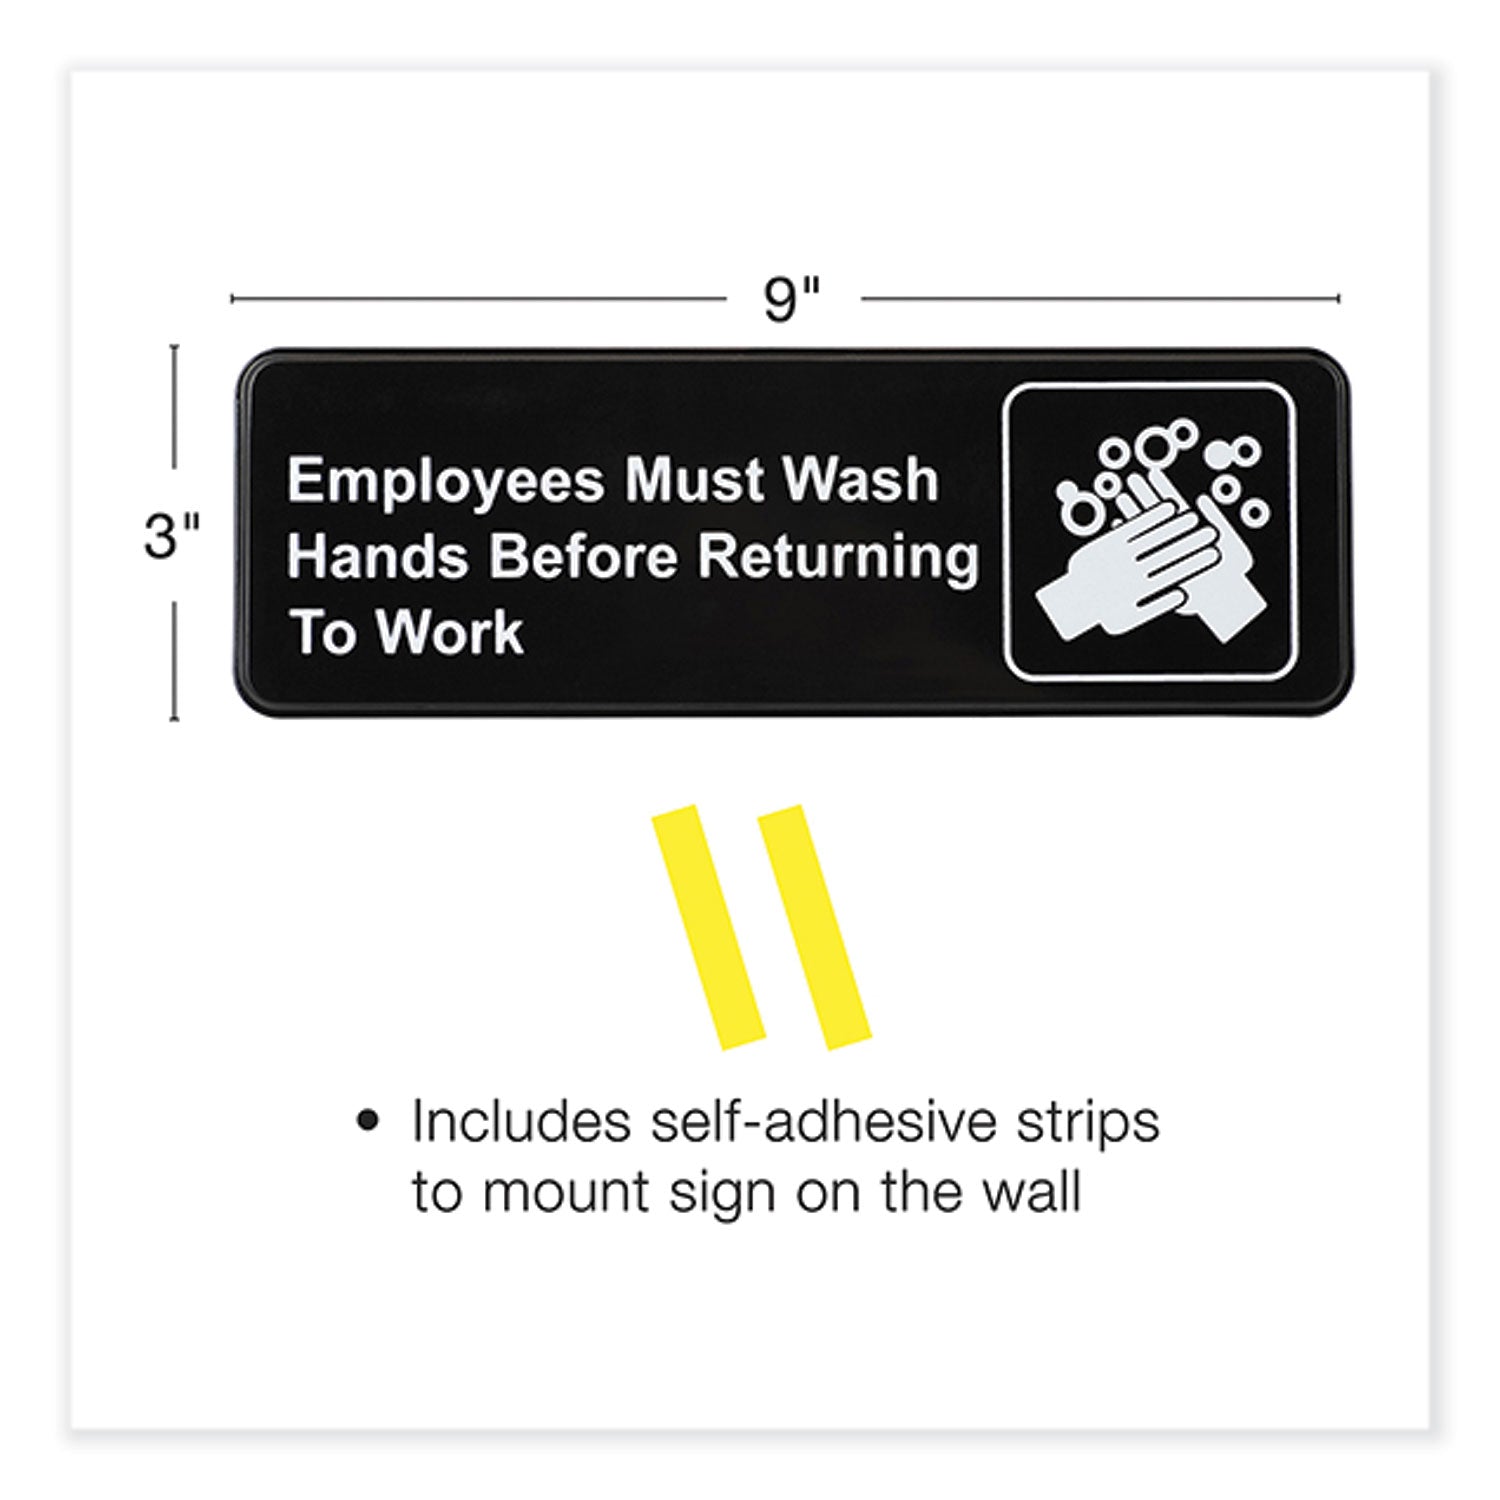 indoor-outdoor-restroom-with-braille-text-6-x-9-black-face-white-graphics-3-pack_exohd0049s - 2